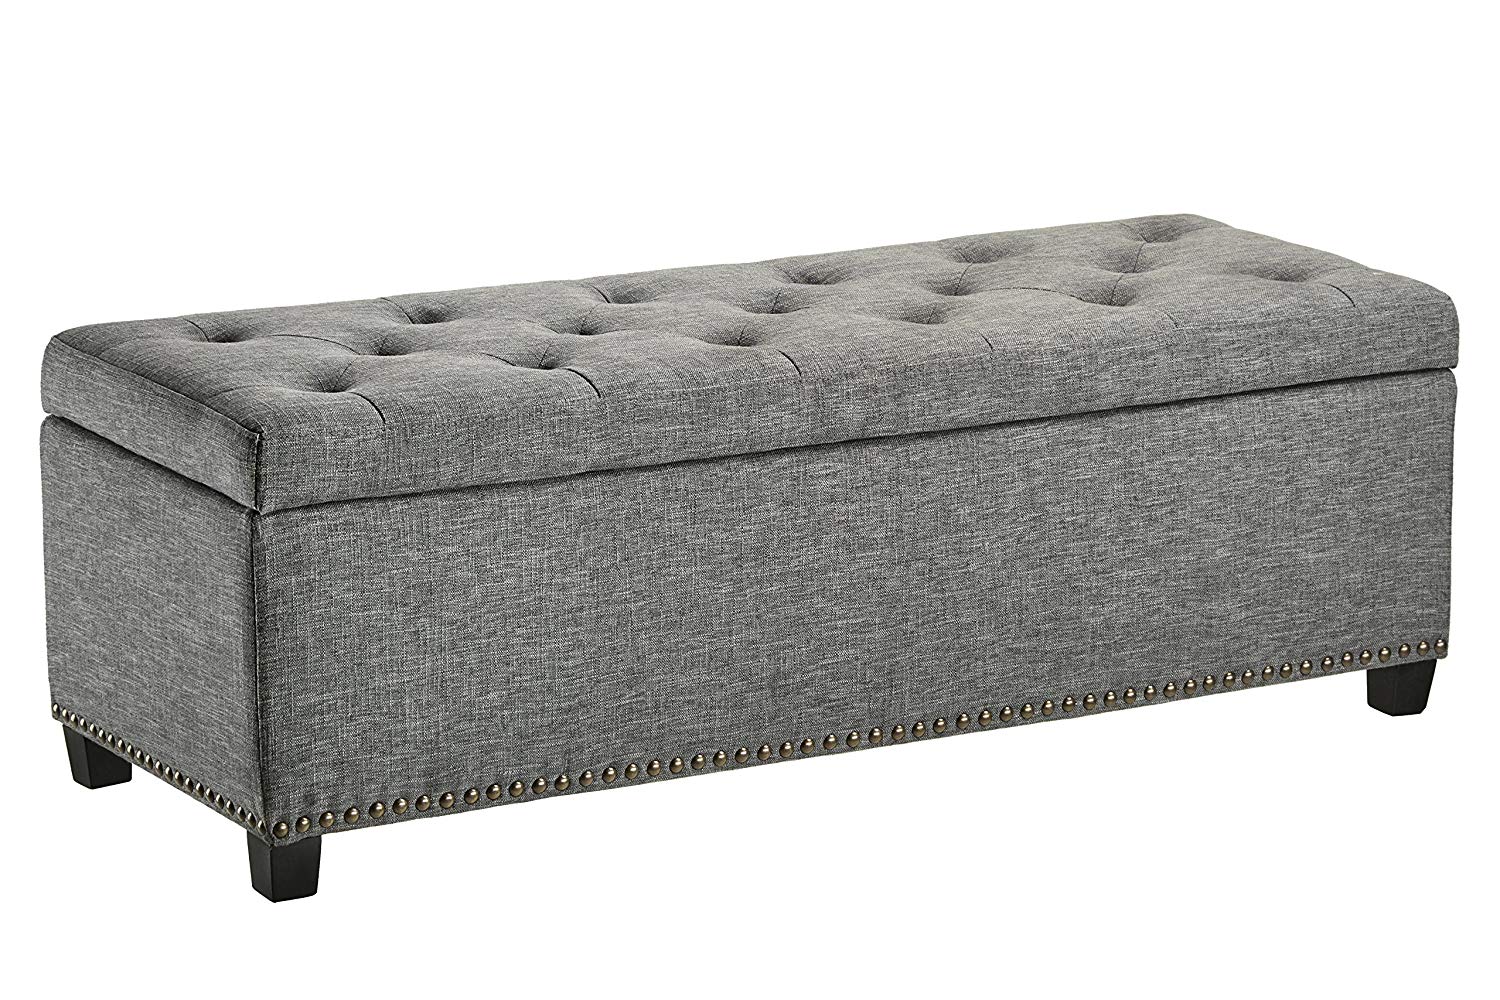 First Hill Thomas Rectangular Storage, Long Leather Ottoman Bench